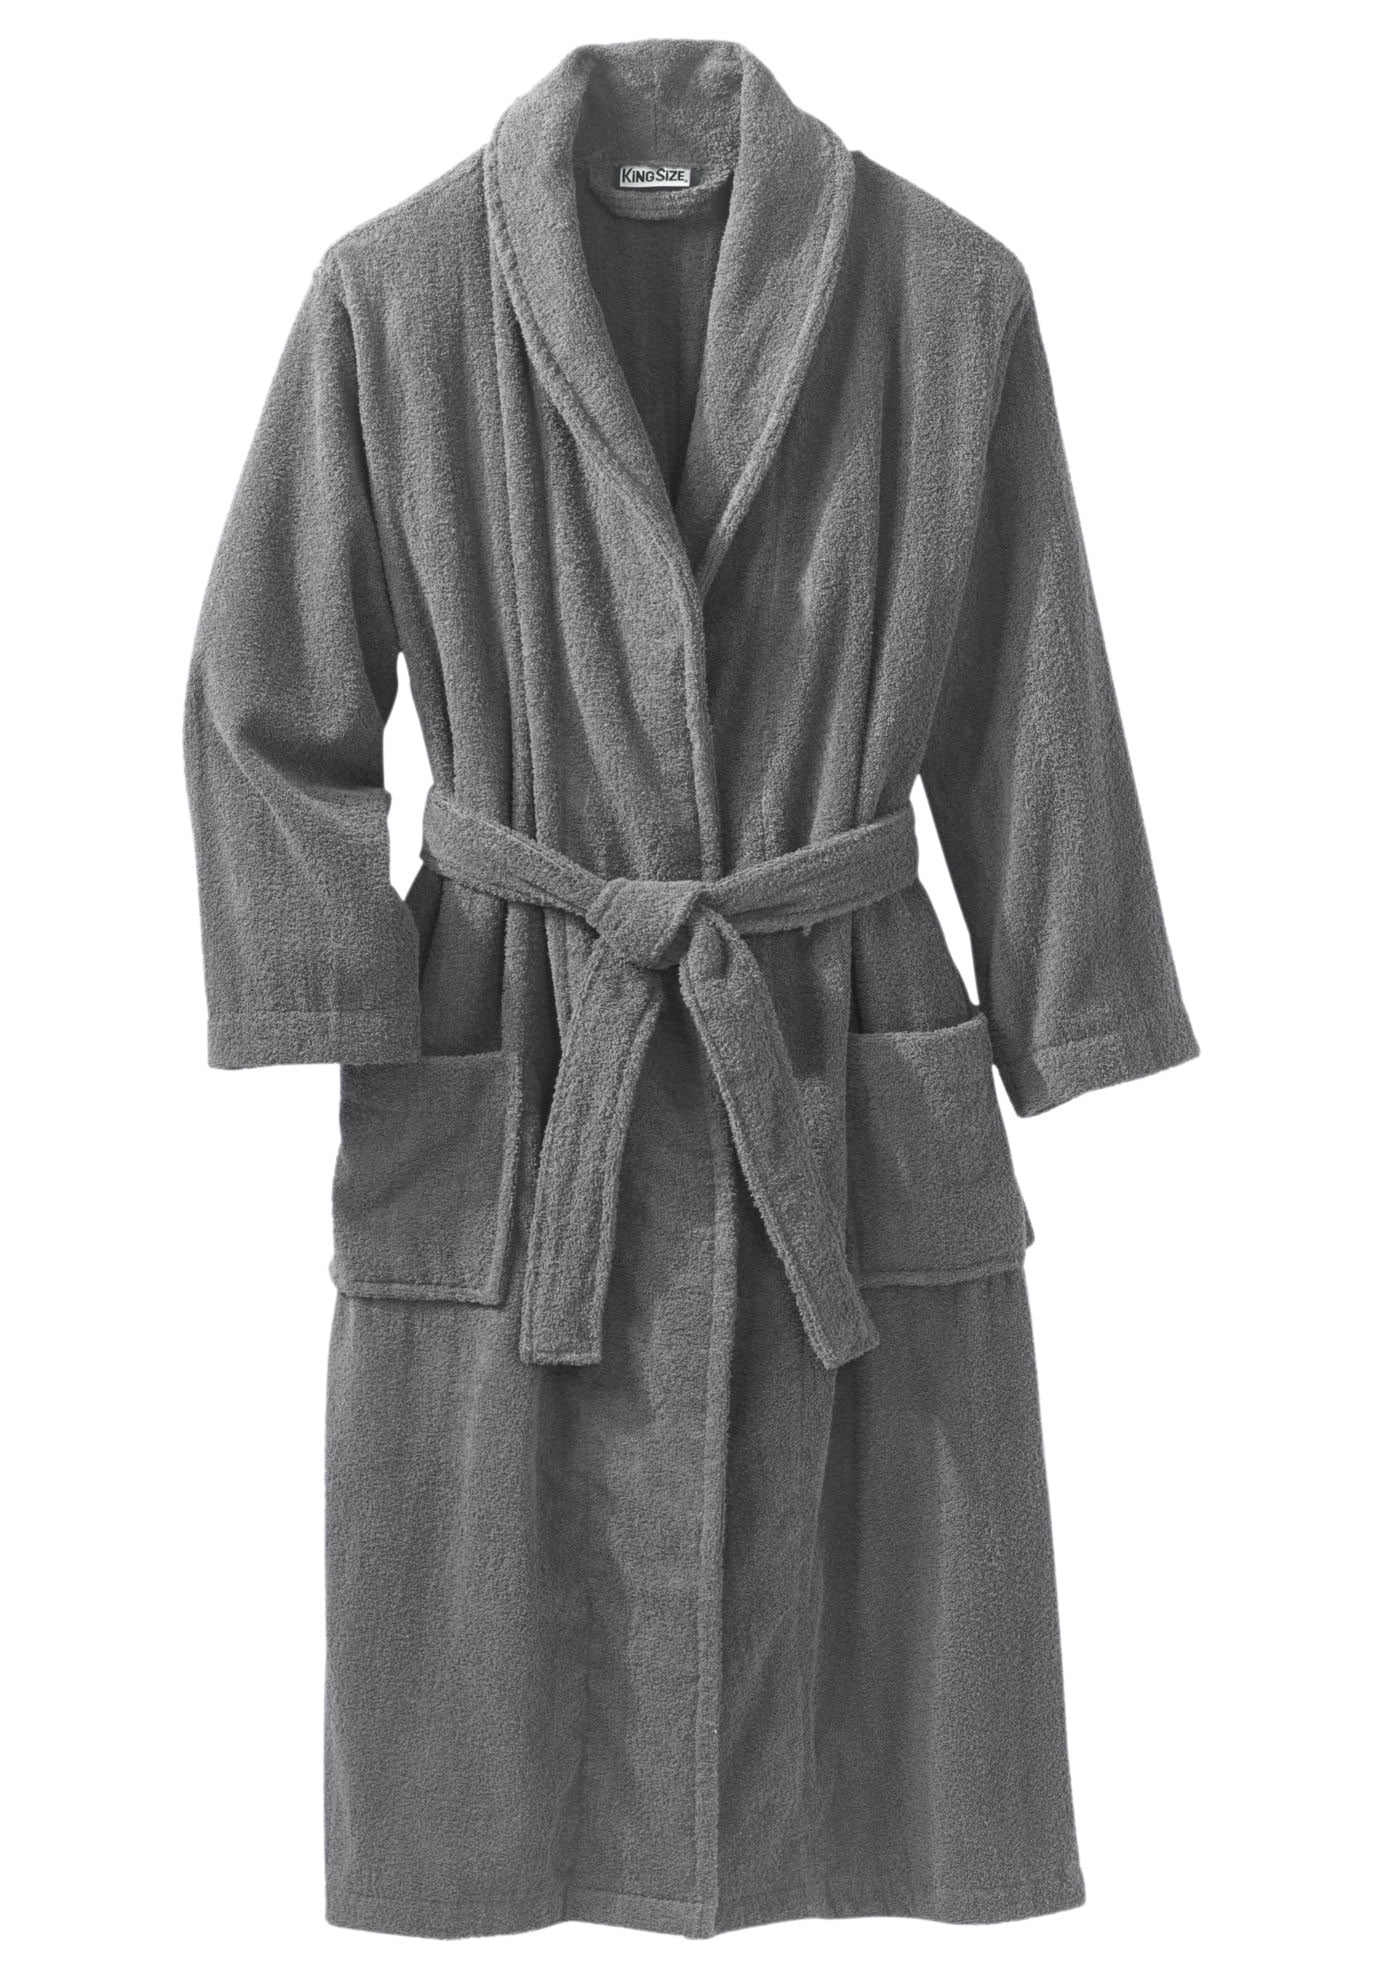 Alexander Del Rossa Men's Robe, Plush Fleece Bathrobe with Pockets, Red  Buffalo Check Plaid with Sherpa, Large-XL (A0261Q42XL) at Amazon Men's  Clothing store